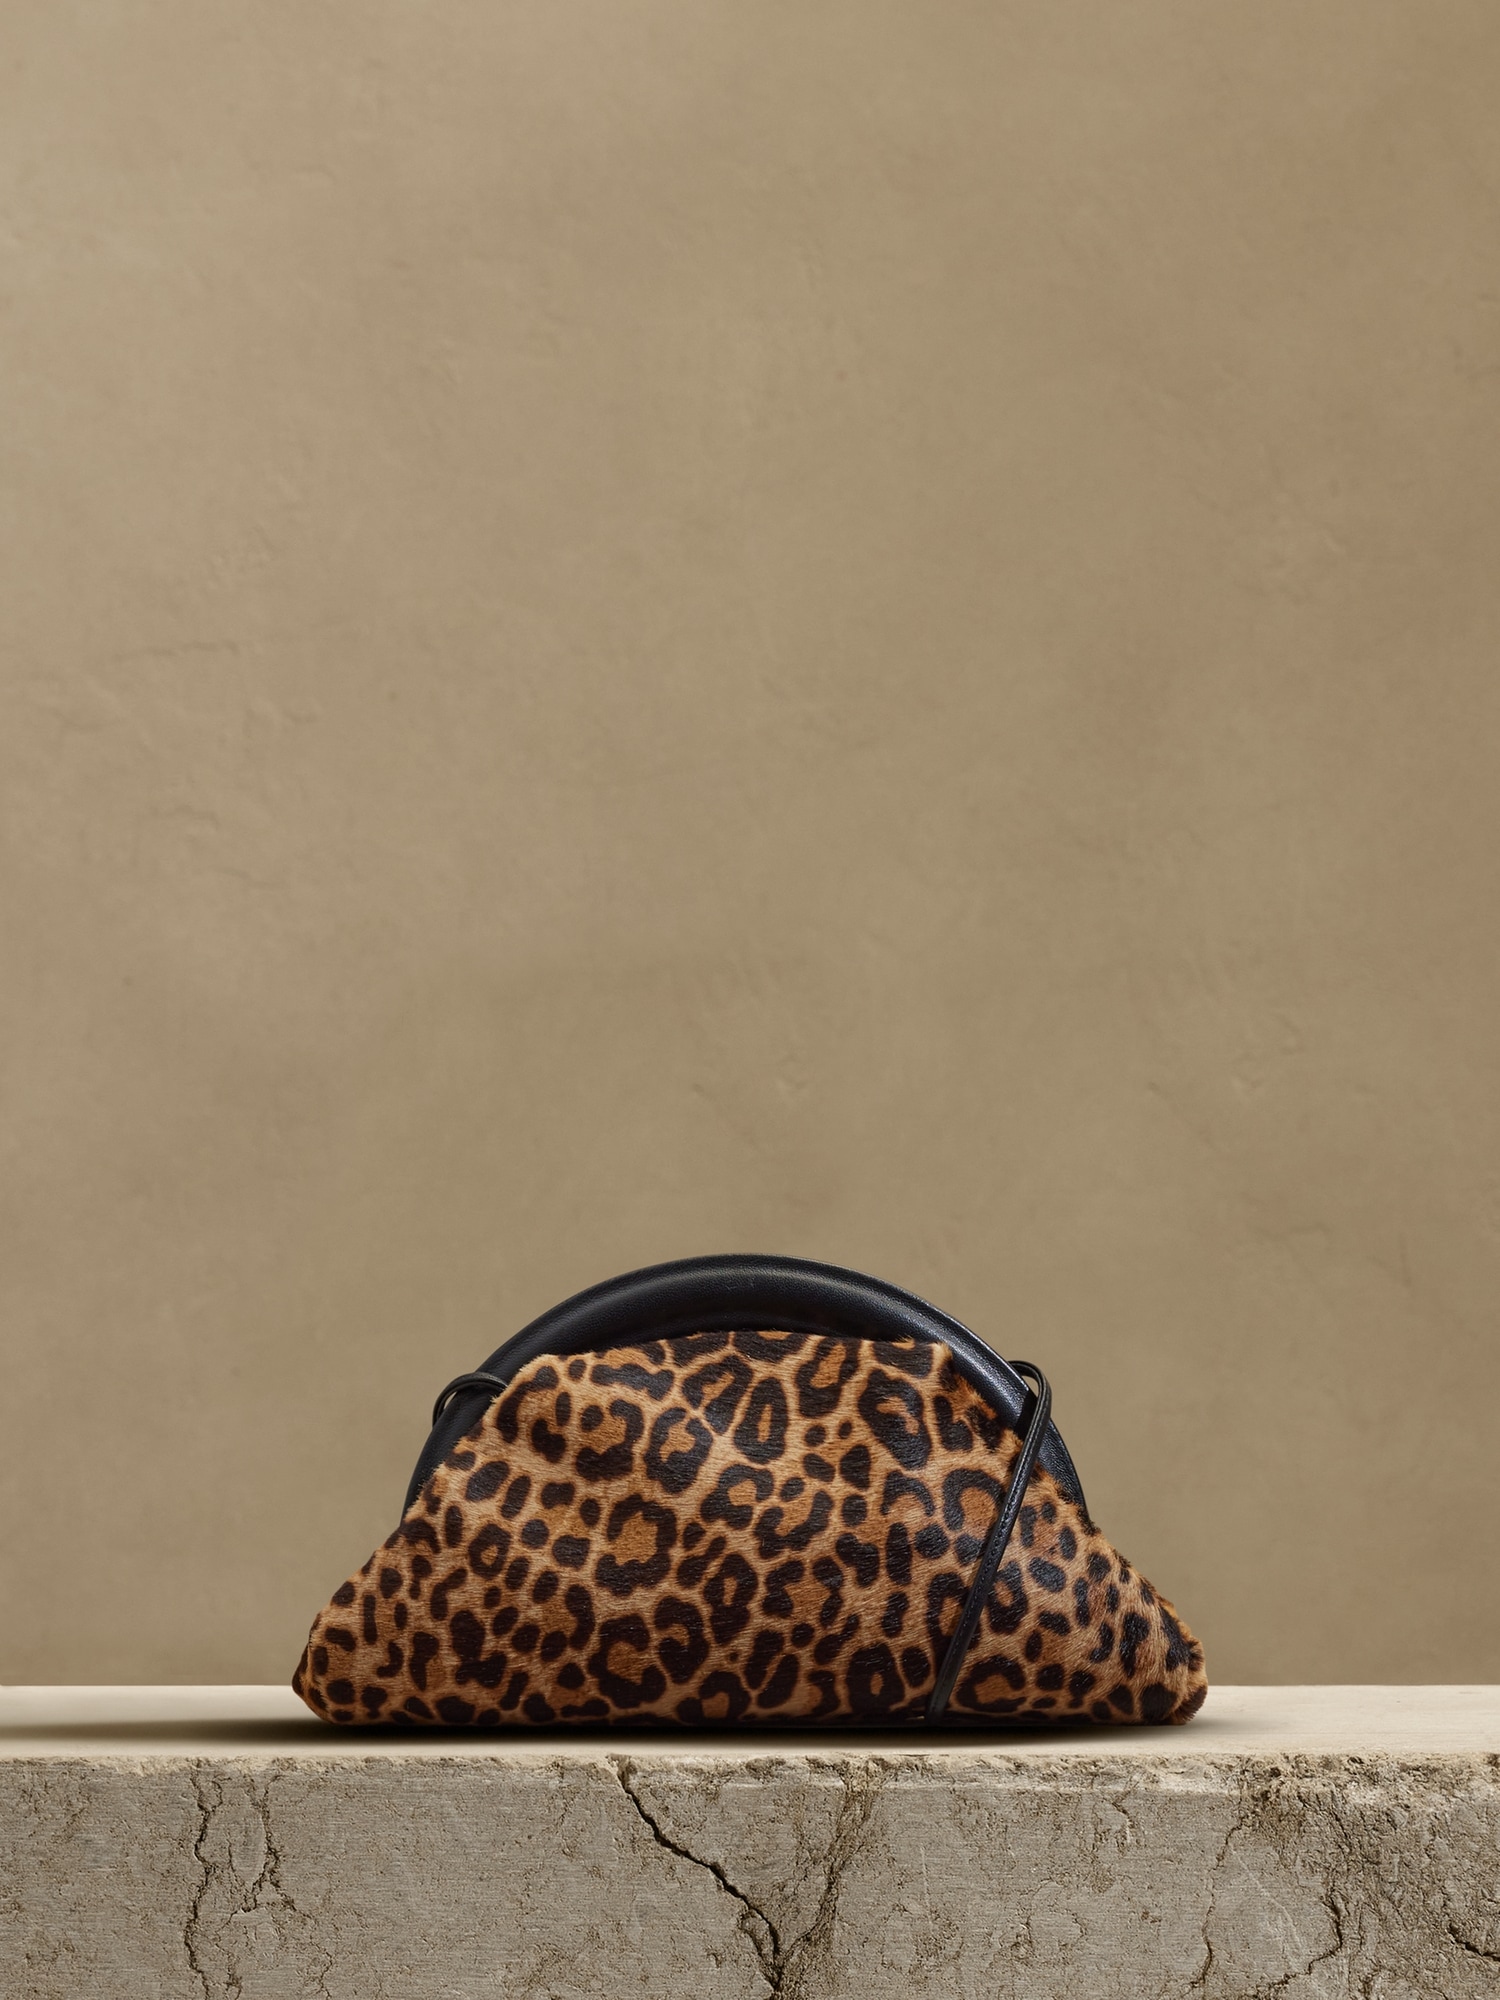 Centre Stage Leopard Clutch